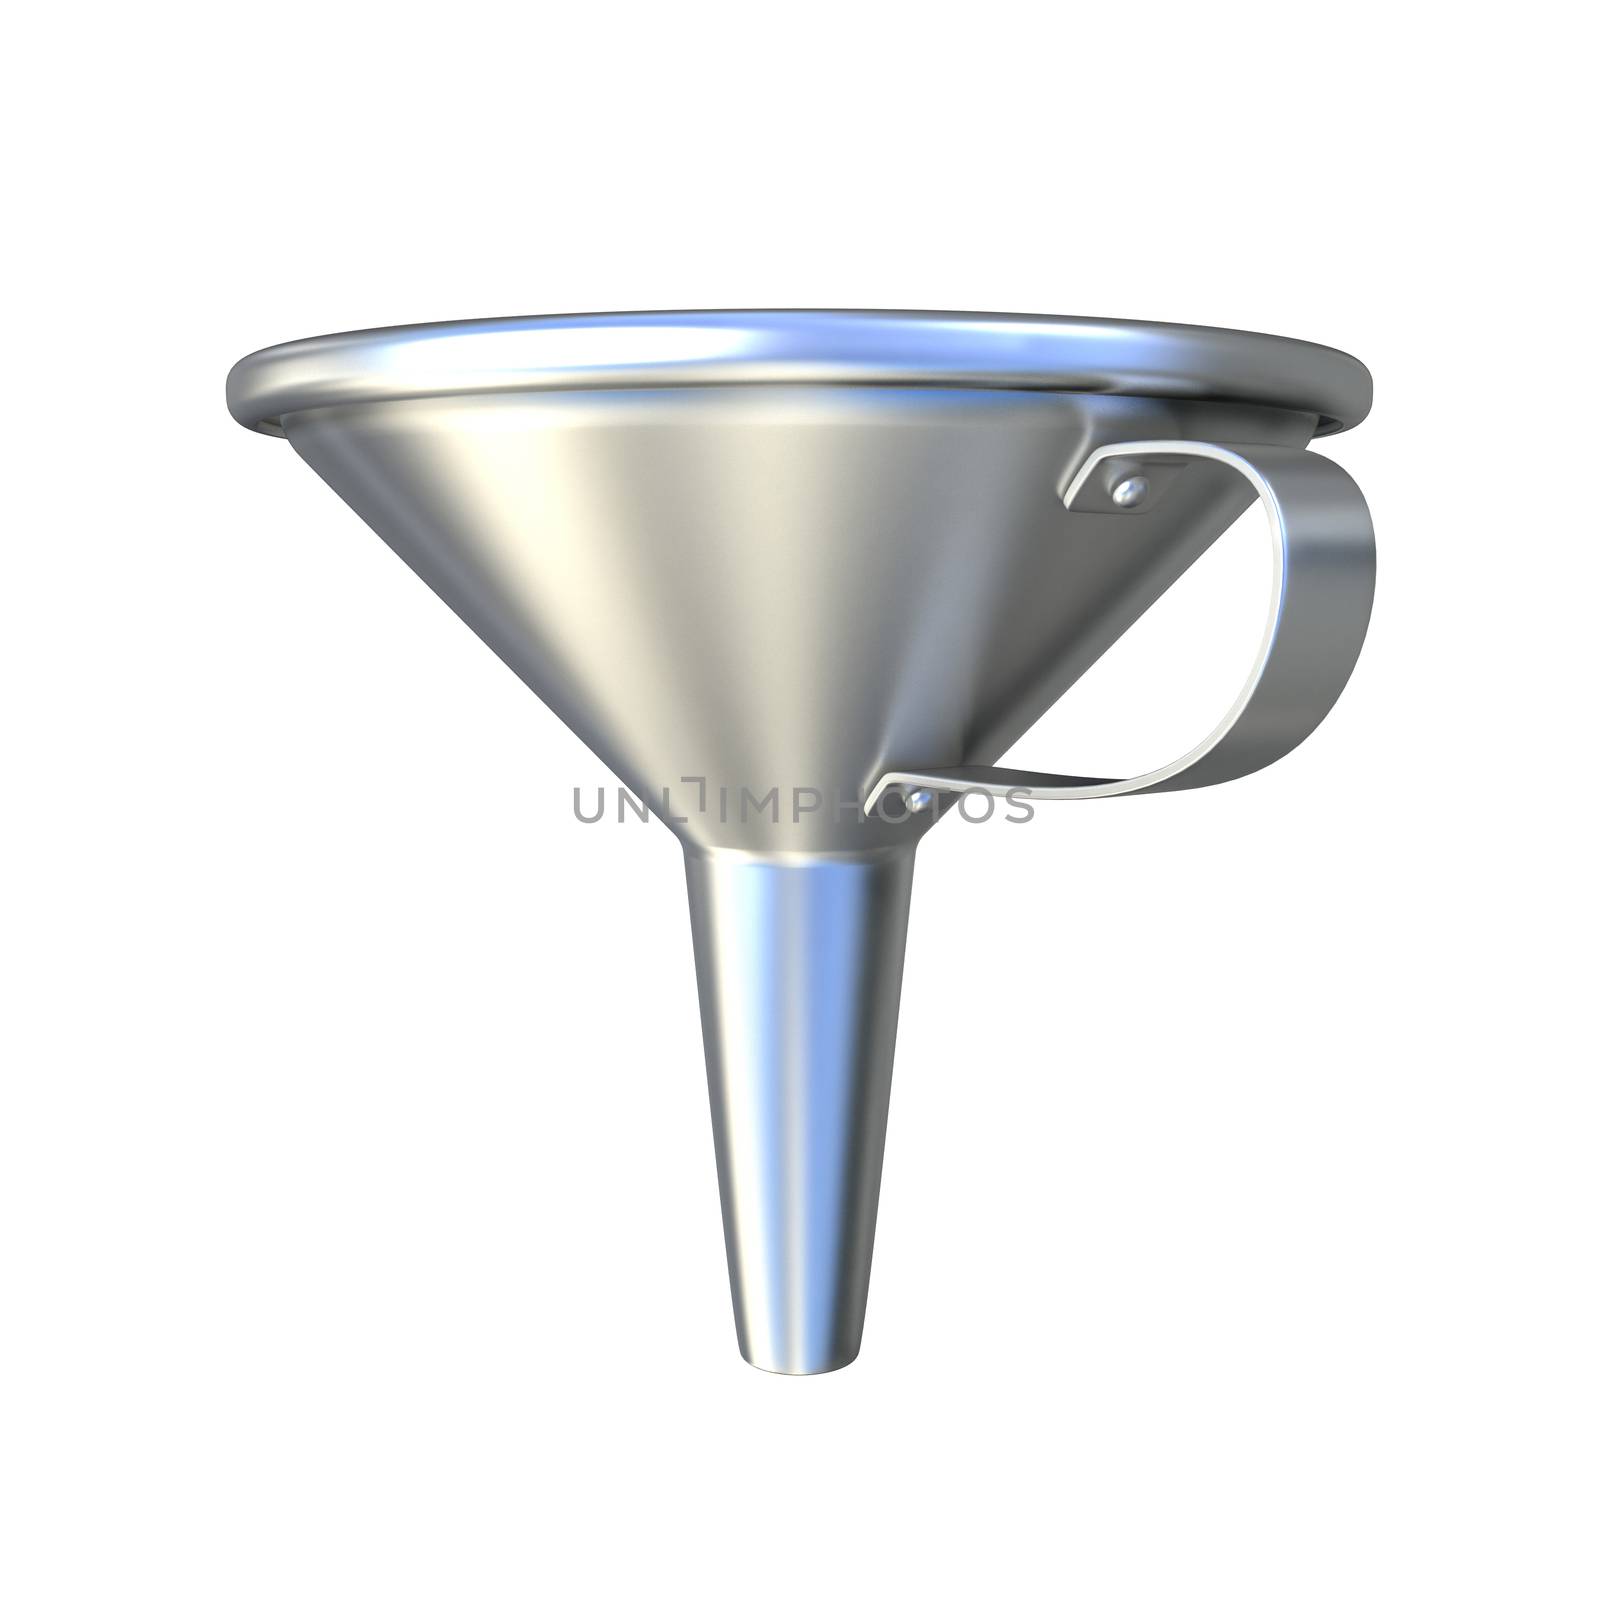 Steel funnel. 3D render illustration, isolated on white. Side view